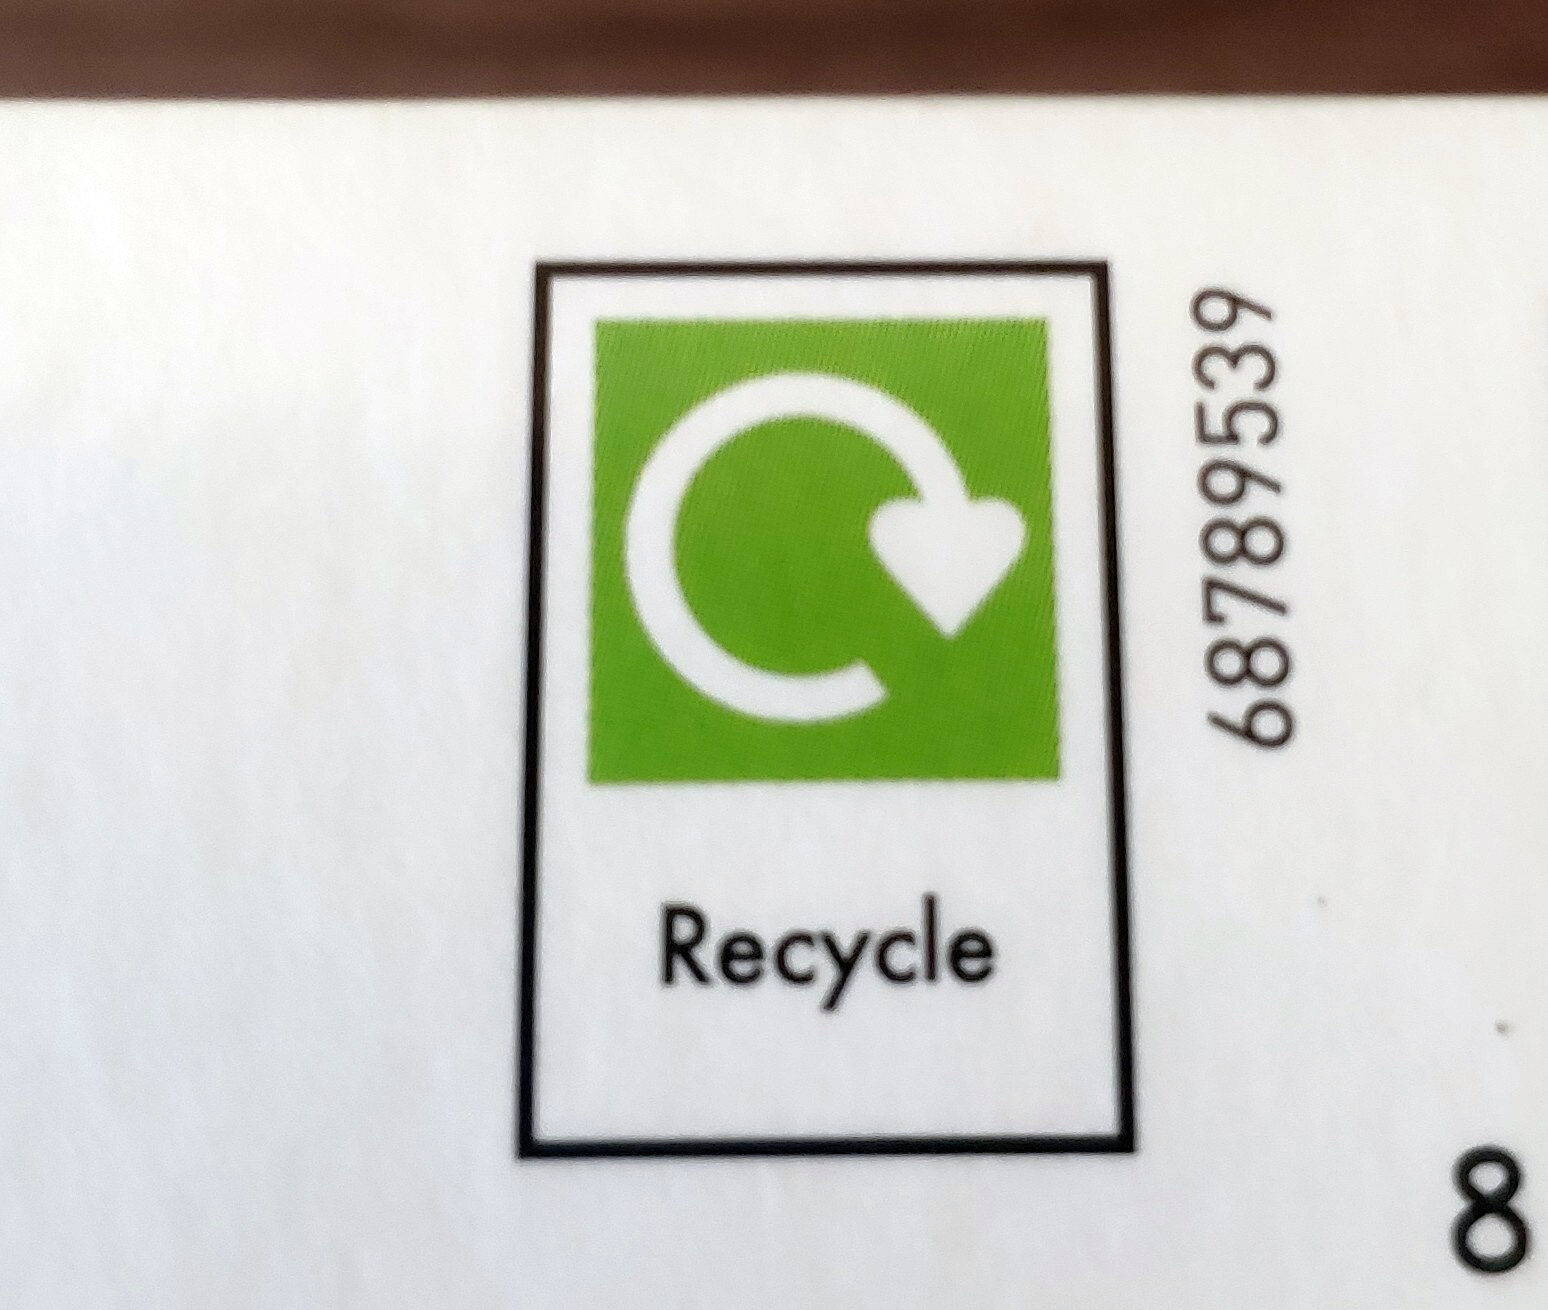 Patty on the back - Recycling instructions and/or packaging information